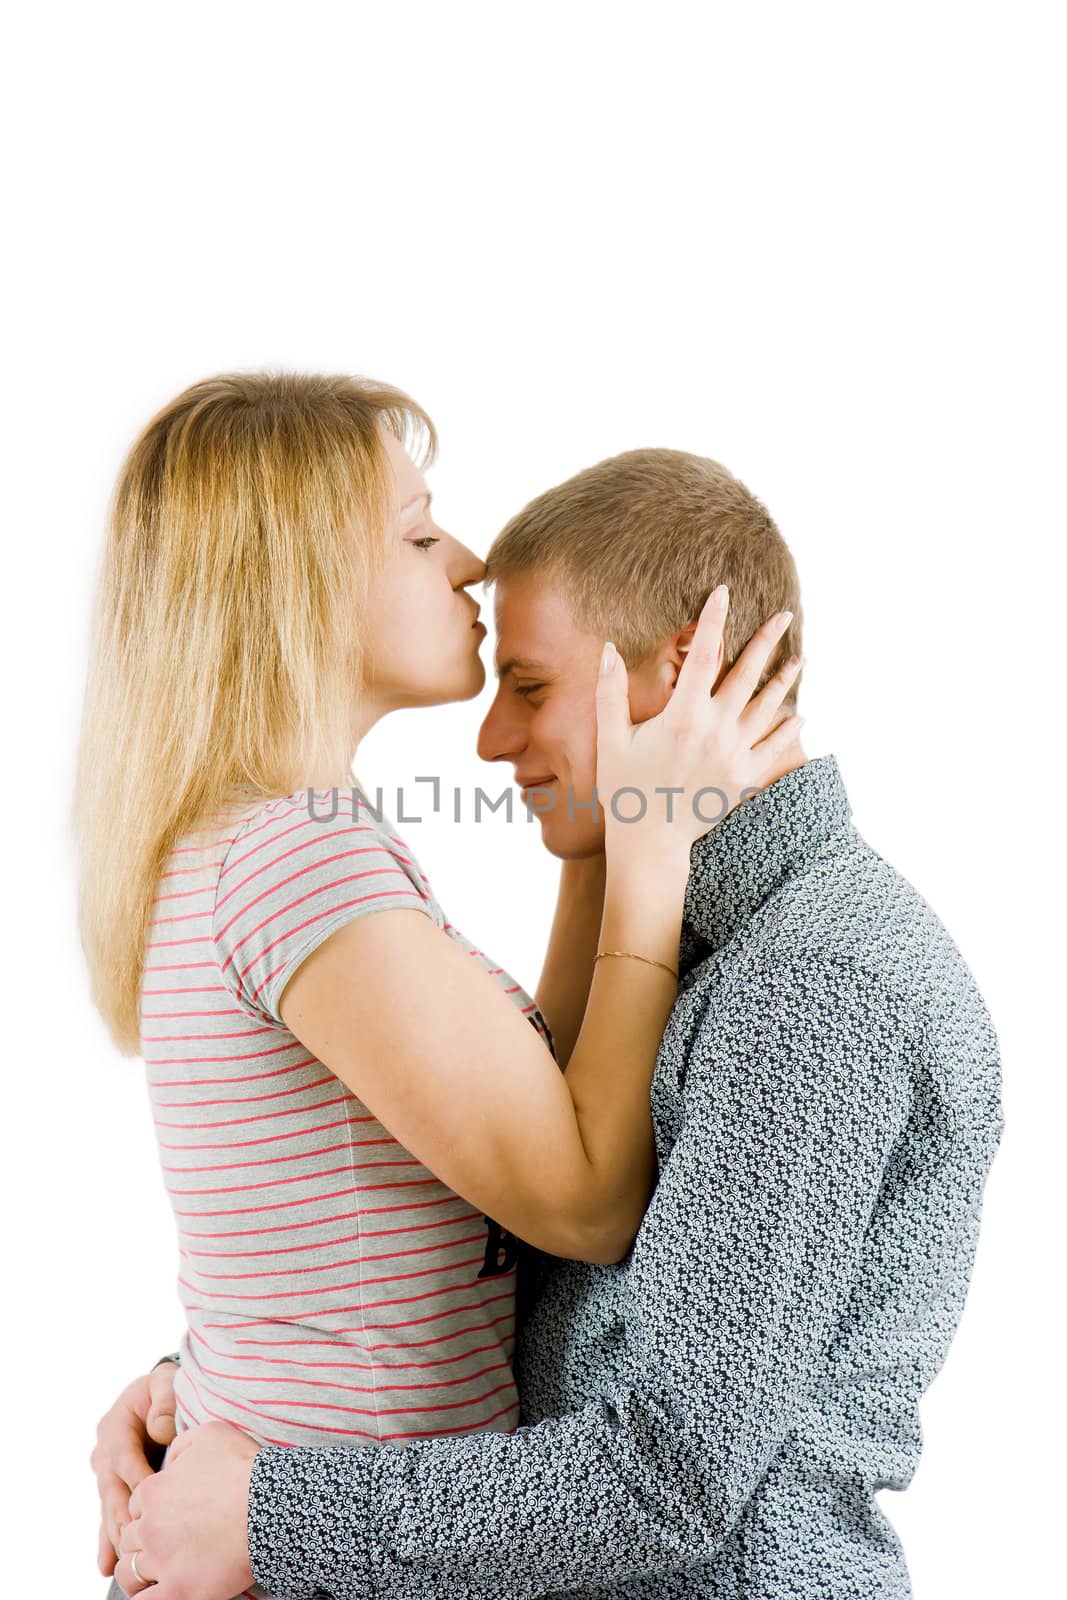 girl kissing a man in a forehead on an isolated white background
